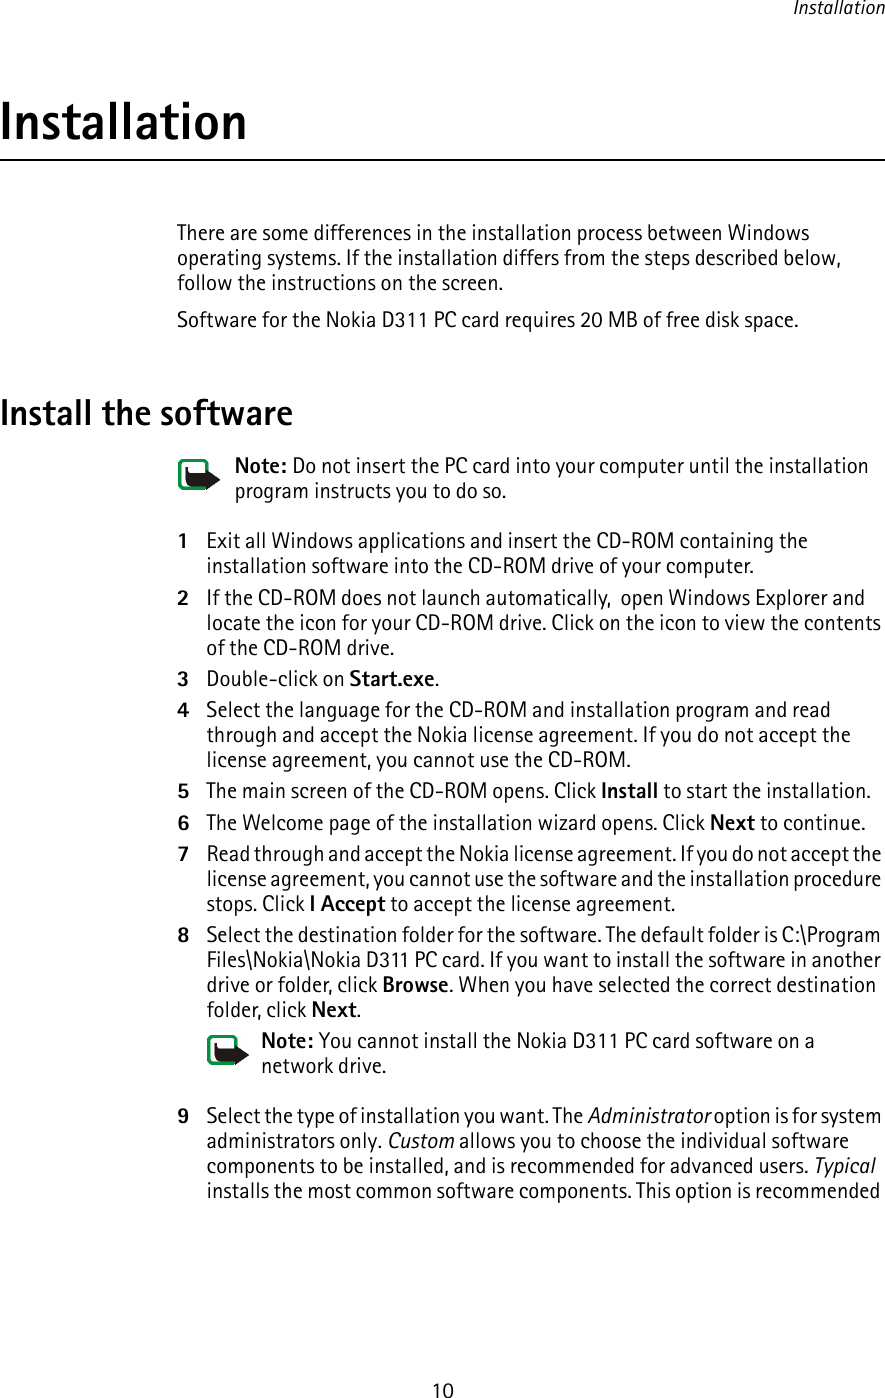 Installation10InstallationThere are some differences in the installation process between Windows operating systems. If the installation differs from the steps described below, follow the instructions on the screen.Software for the Nokia D311 PC card requires 20 MB of free disk space.Install the softwareNote: Do not insert the PC card into your computer until the installation program instructs you to do so.1Exit all Windows applications and insert the CD-ROM containing the installation software into the CD-ROM drive of your computer.2If the CD-ROM does not launch automatically,  open Windows Explorer and locate the icon for your CD-ROM drive. Click on the icon to view the contents of the CD-ROM drive. 3Double-click on Start.exe.4Select the language for the CD-ROM and installation program and read through and accept the Nokia license agreement. If you do not accept the license agreement, you cannot use the CD-ROM.5The main screen of the CD-ROM opens. Click Install to start the installation.6The Welcome page of the installation wizard opens. Click Next to continue.7Read through and accept the Nokia license agreement. If you do not accept the license agreement, you cannot use the software and the installation procedure stops. Click I Accept to accept the license agreement.8Select the destination folder for the software. The default folder is C:\Program Files\Nokia\Nokia D311 PC card. If you want to install the software in another drive or folder, click Browse. When you have selected the correct destination folder, click Next.Note: You cannot install the Nokia D311 PC card software on a network drive.9Select the type of installation you want. The Administrator option is for system administrators only. Custom allows you to choose the individual software components to be installed, and is recommended for advanced users. Typical installs the most common software components. This option is recommended 